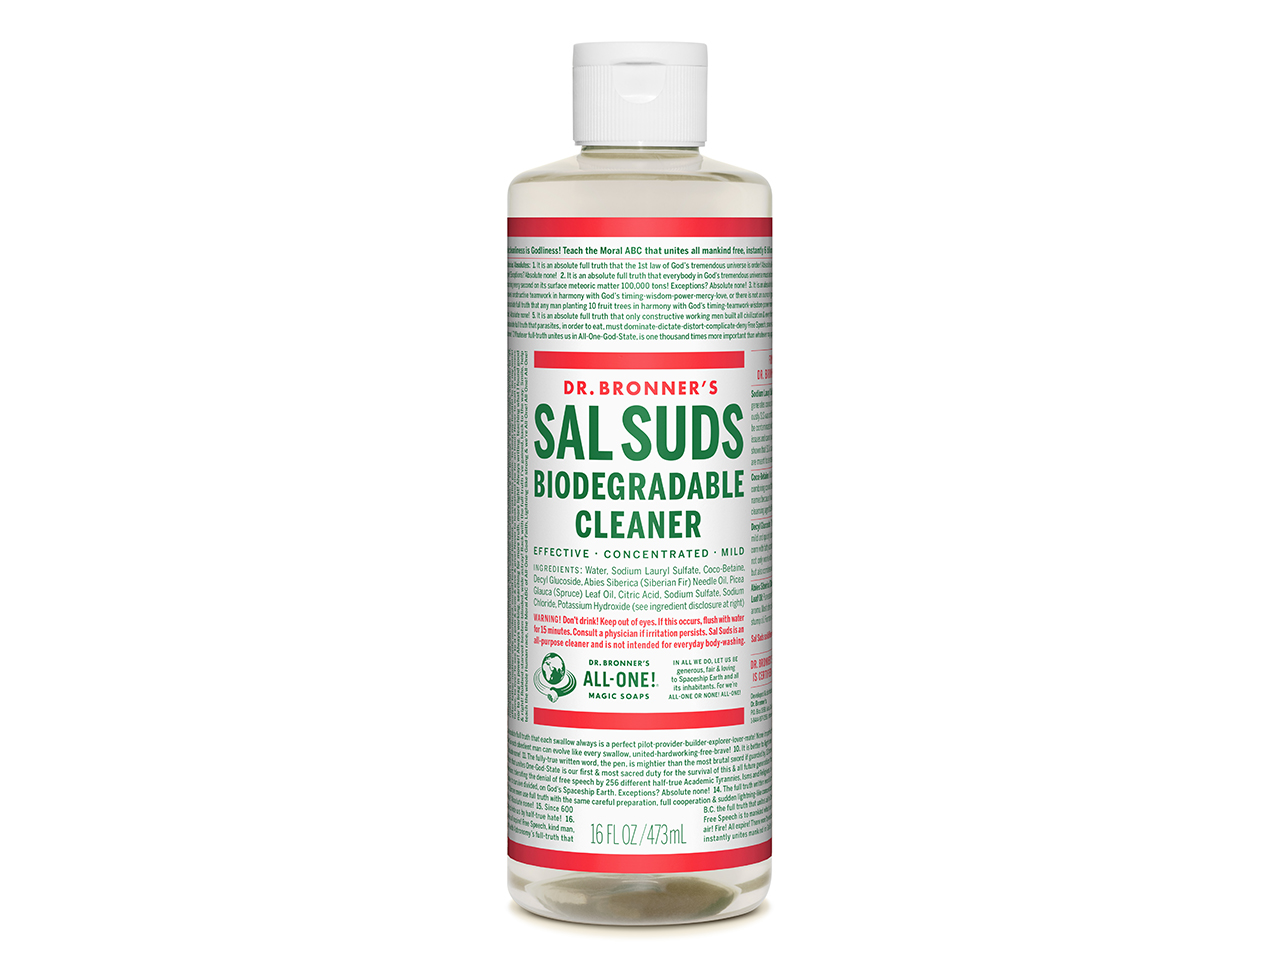 Eco-friendly cleaning products, Sal Suds biodegradable cleaner bottle